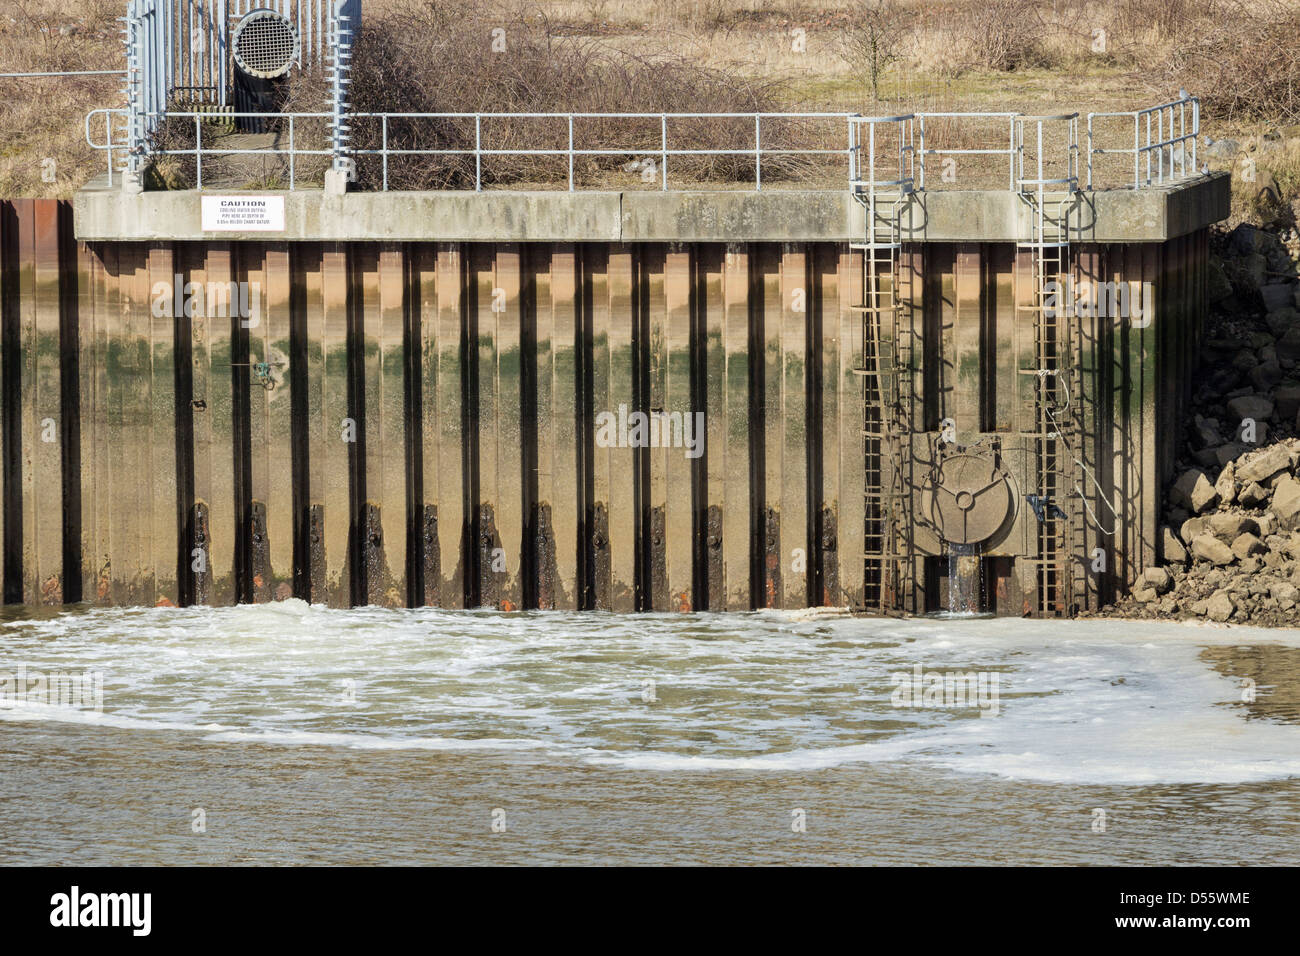 Sewage/storm overflow outflow pipes on River Tees at Middlesbrough, England, UK Stock Photo